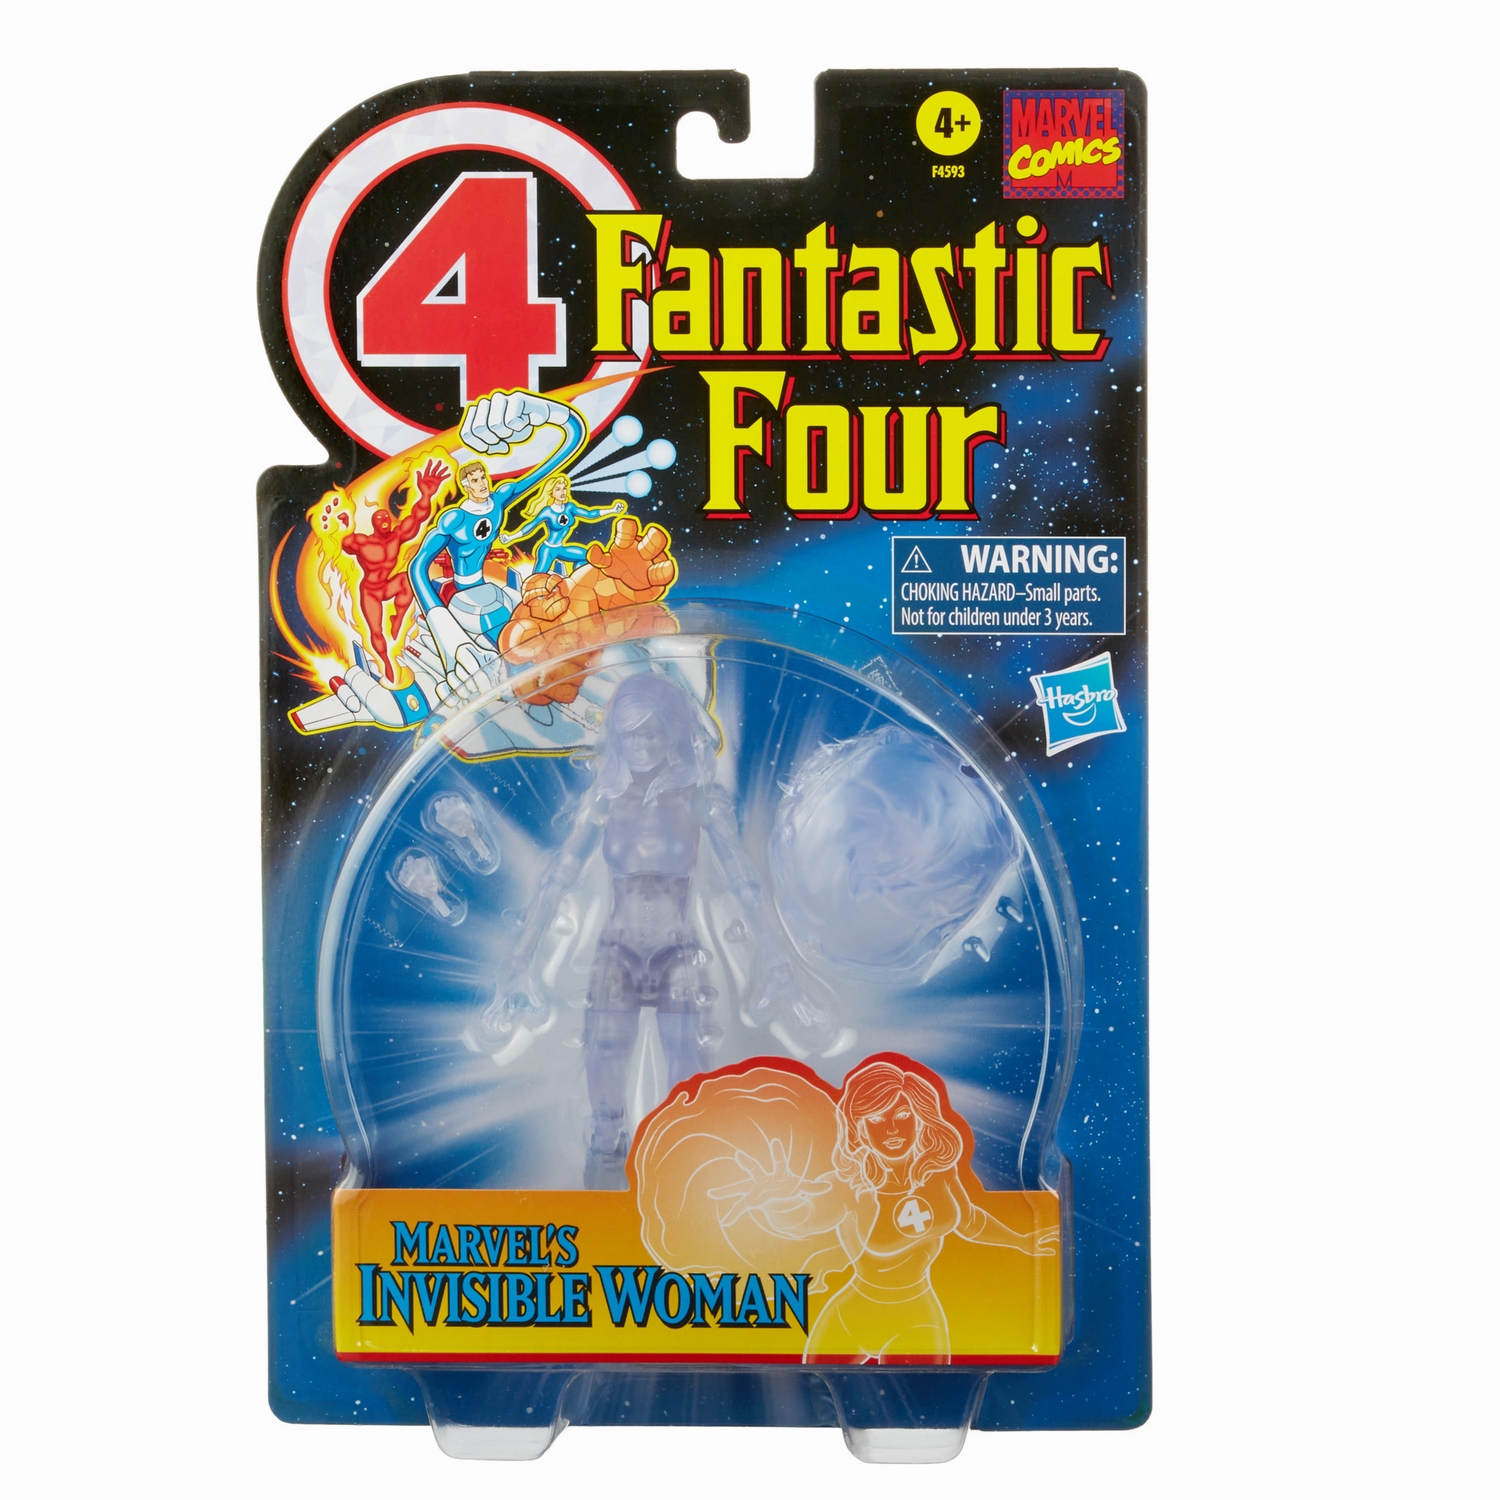 MARVEL LEGENDS SERIES 6-INCH RETRO FANTASTIC FOUR MARVEL’S INVISIBLE WOMAN Figure (Clear)_in pck 1.jpg